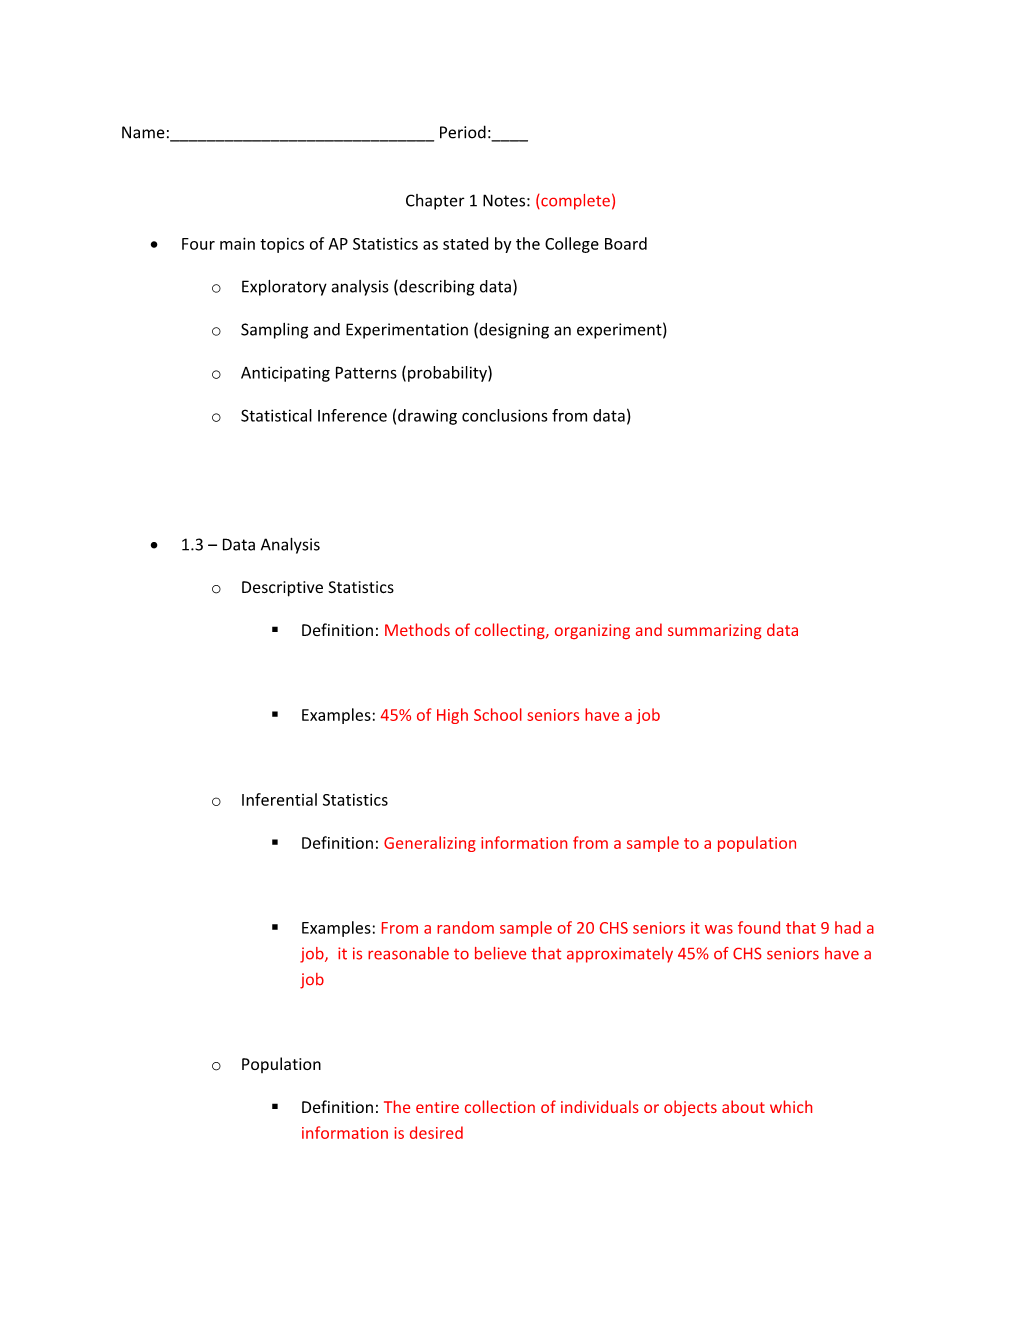 Chapter 1 Notes: (Complete)